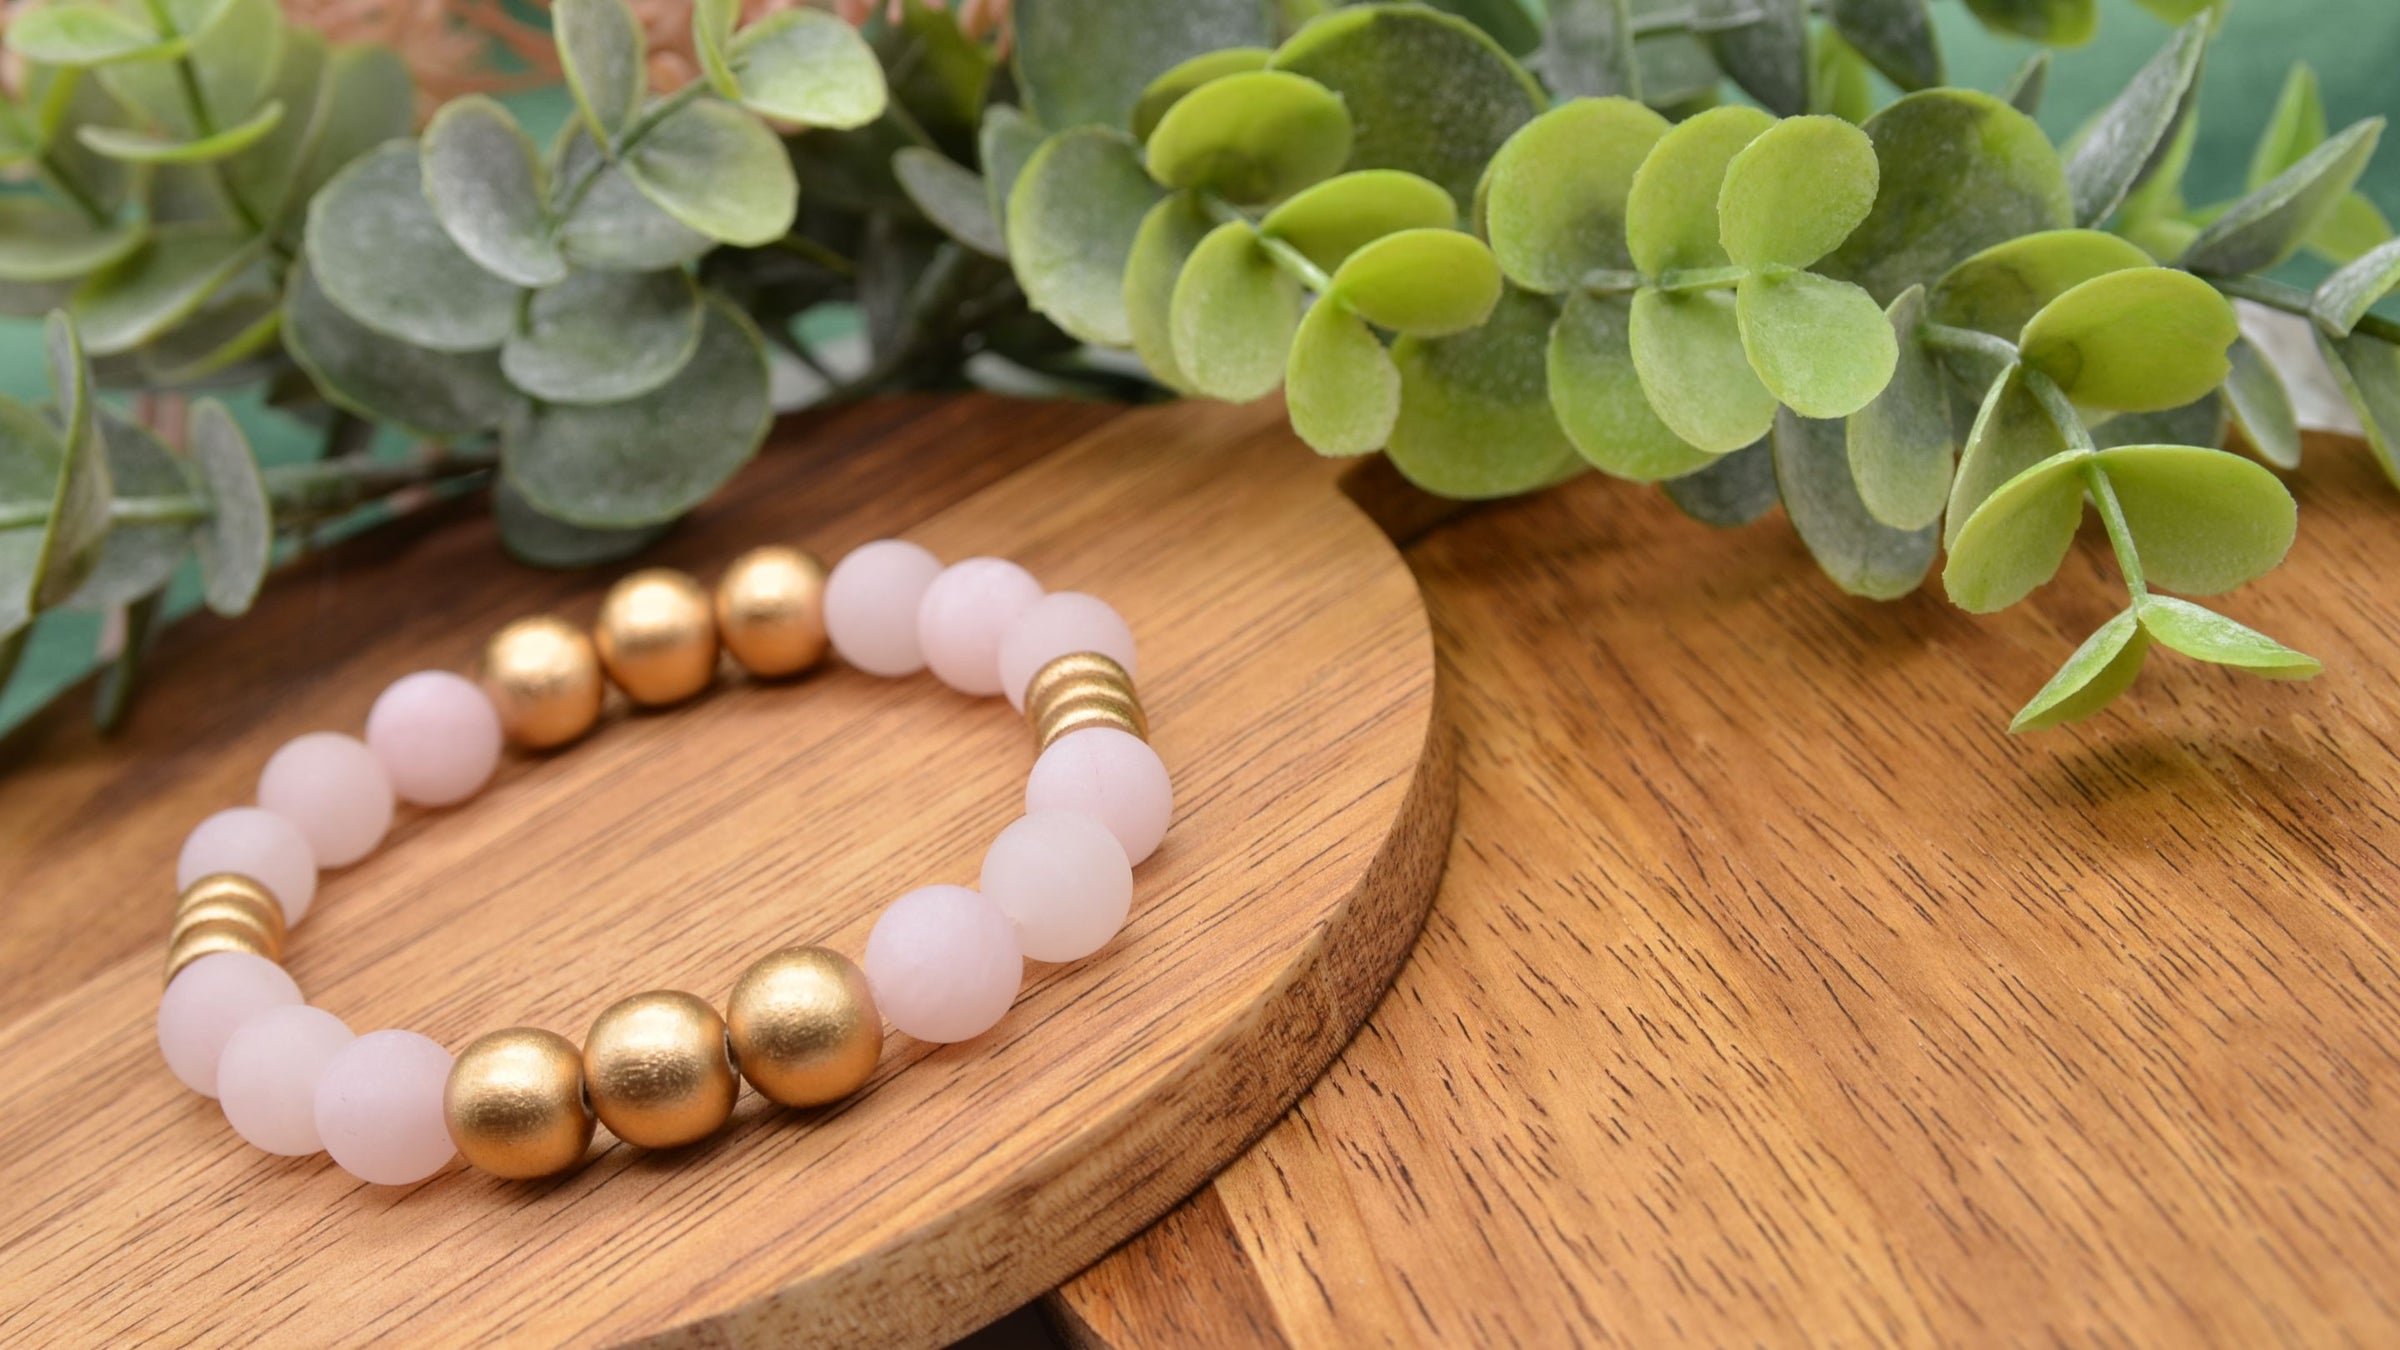 Rose Quartz gemstone jewelry with natural gemstones, perfect gift for her, gifts for him, 18k gold plated | Emerald Sun Creations